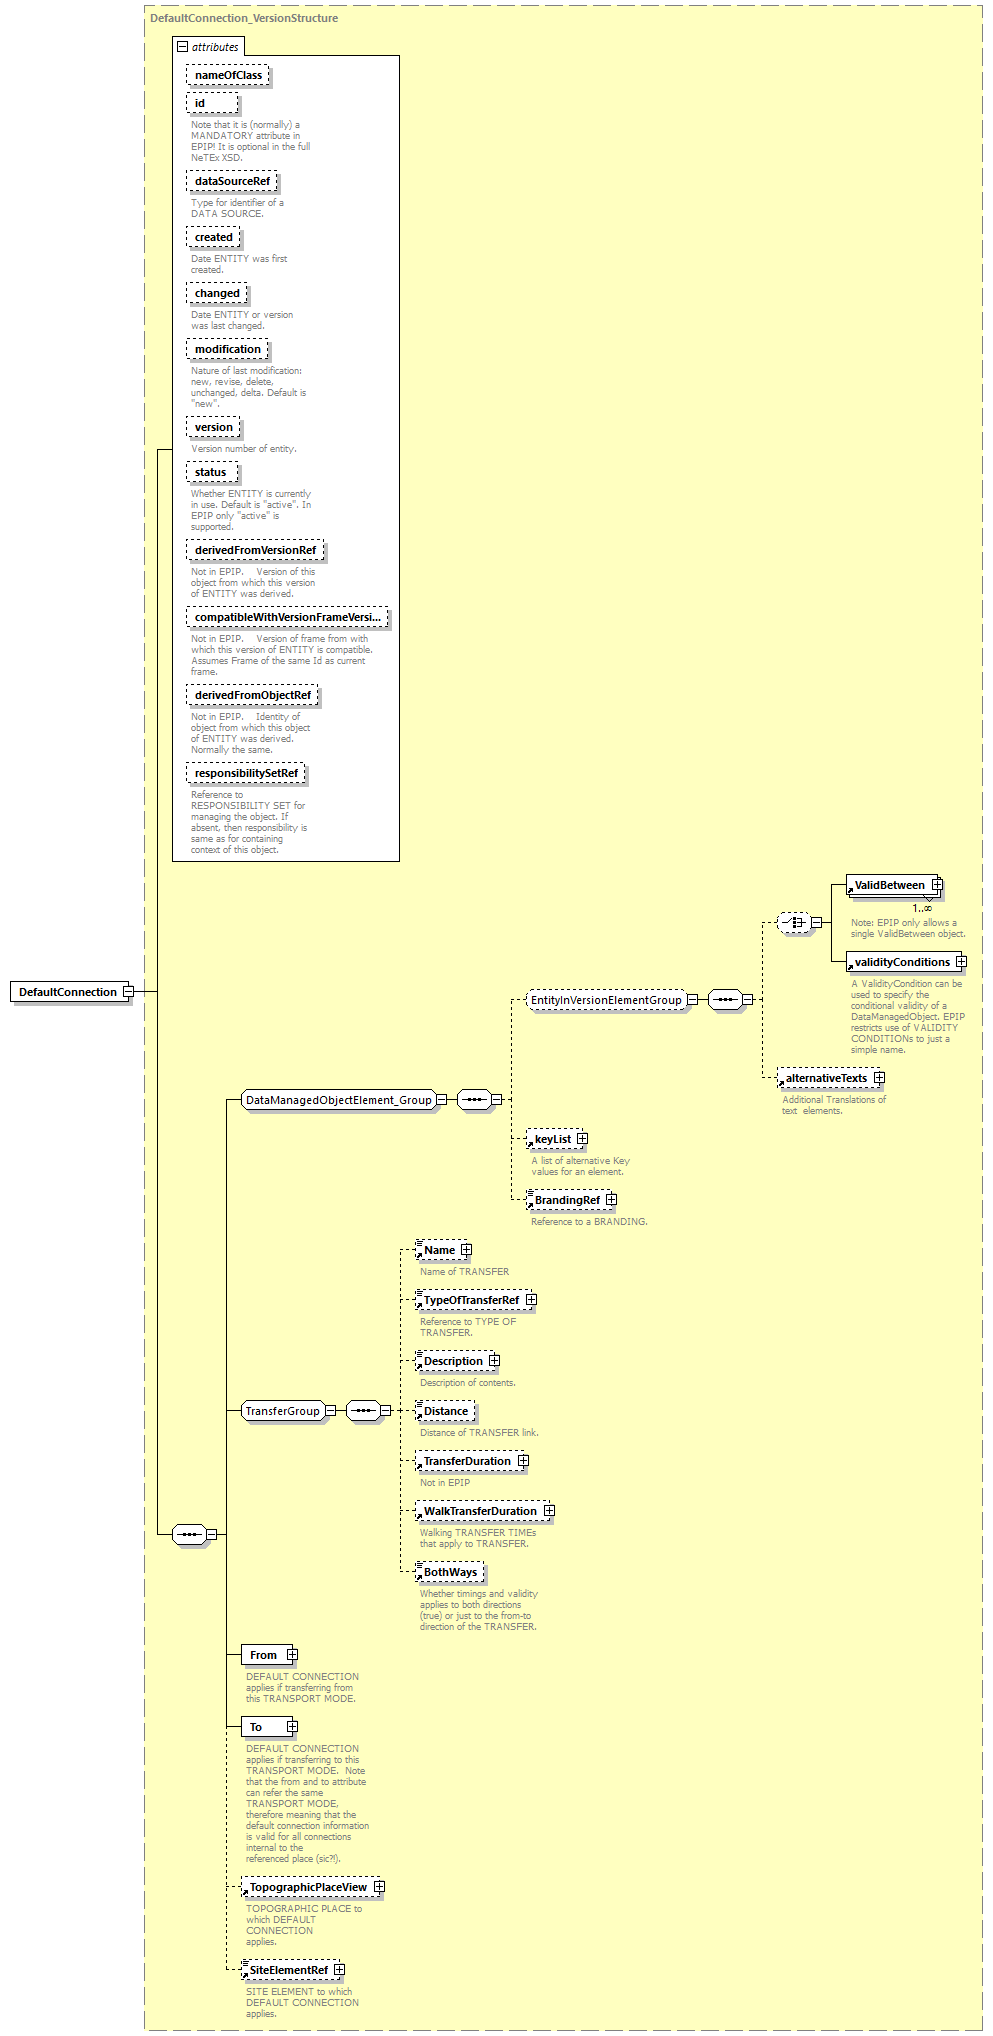 reduced_diagrams/reduced_p131.png